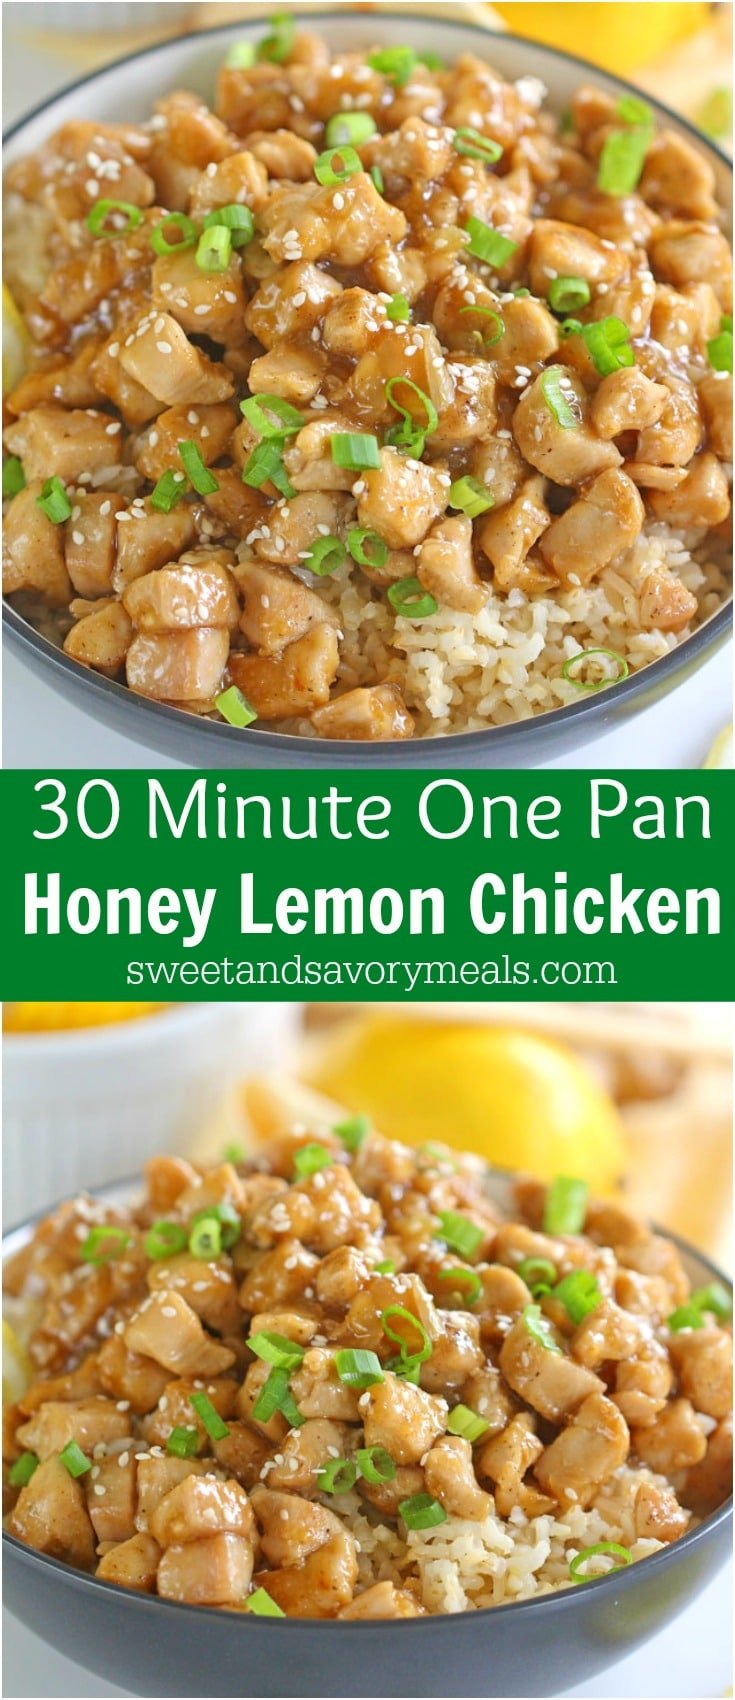 Healthy Honey Lemon Chicken is one of the fastest, most delicious and flavorful dinners you can make in 30 minutes! Not fried and with no processed sugar!